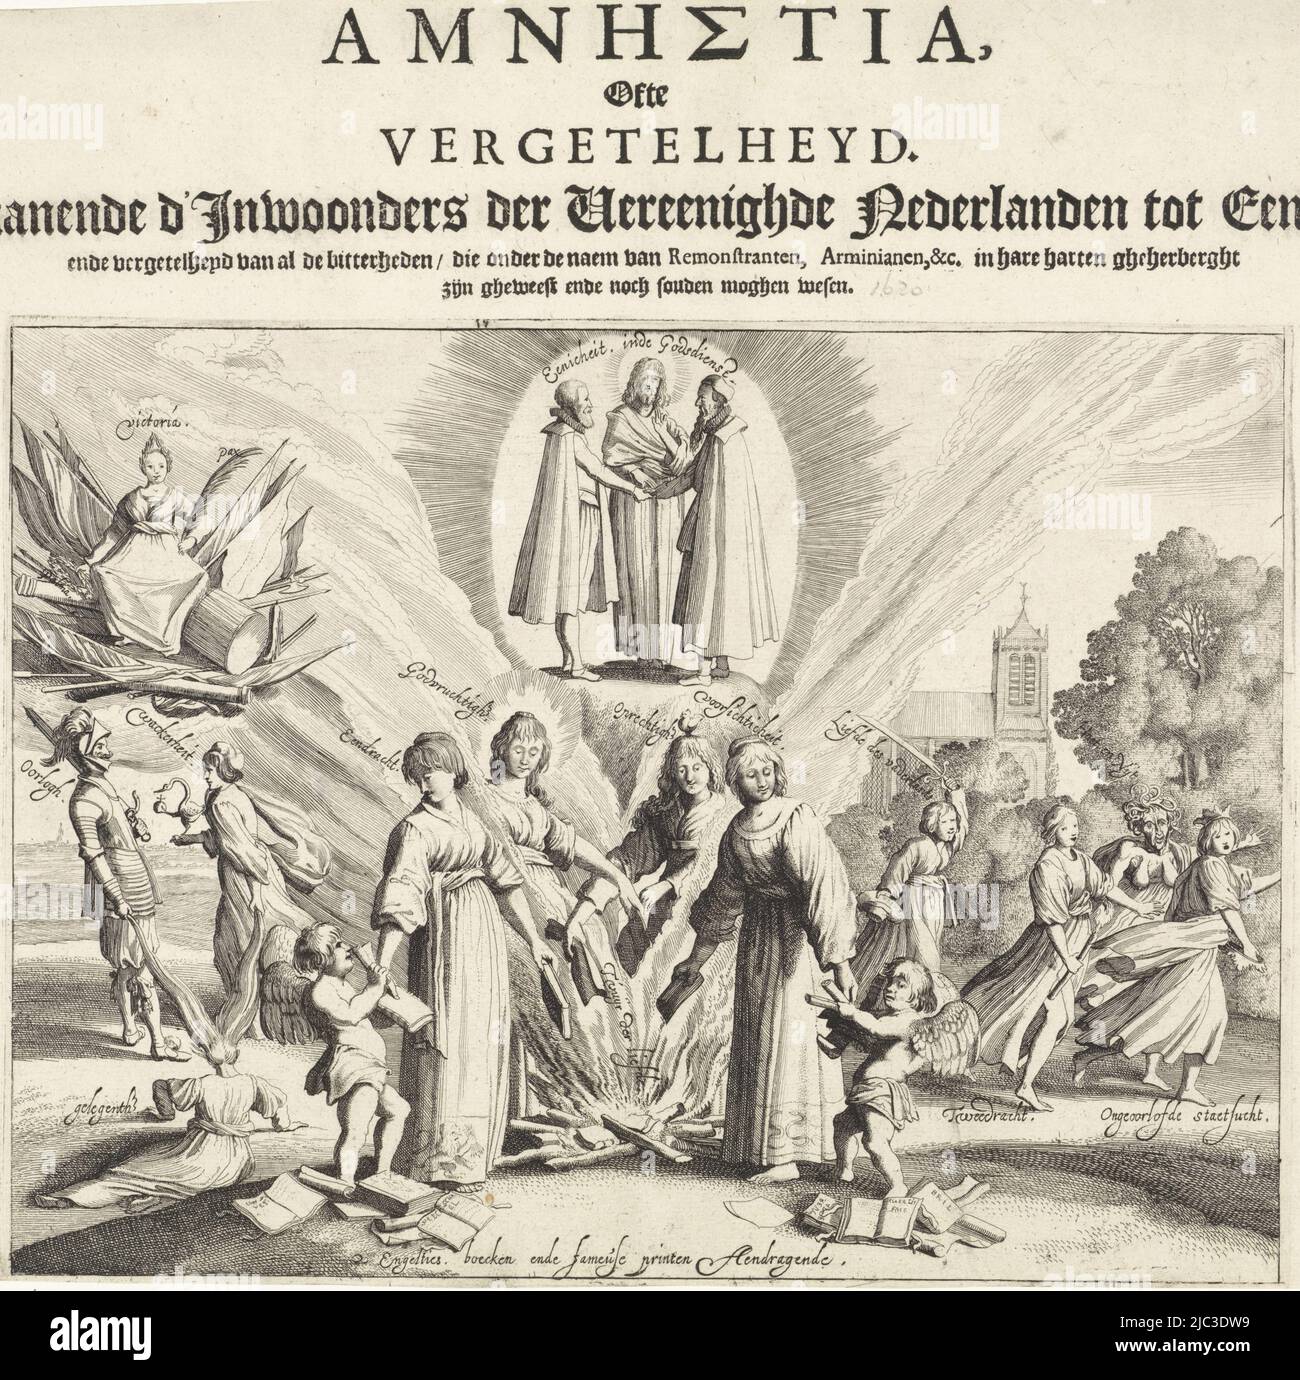 Pamphlet outlining the importance of unity among the Dutch under Maurice's rule. It advocates unity, concord and reconciliation between the religions of the United Netherlands in 1623. Two putti carry books and prints (caption: Engelties boecken ende fameuse printen Aendragende) that are burned by Eendracht, Godsvruchtigh(eit), Oprechtigh(eit) en Voorsichtigheit in: T'vuyr der liefde. Behind on the right, Discord, Haet, Envy, and Unauthorized State Discipline run after each other. On the left, Warh stands and pulls Wackerheyt gelegenth(eit) by the hair behind her. Victoria is seated on a Stock Photo